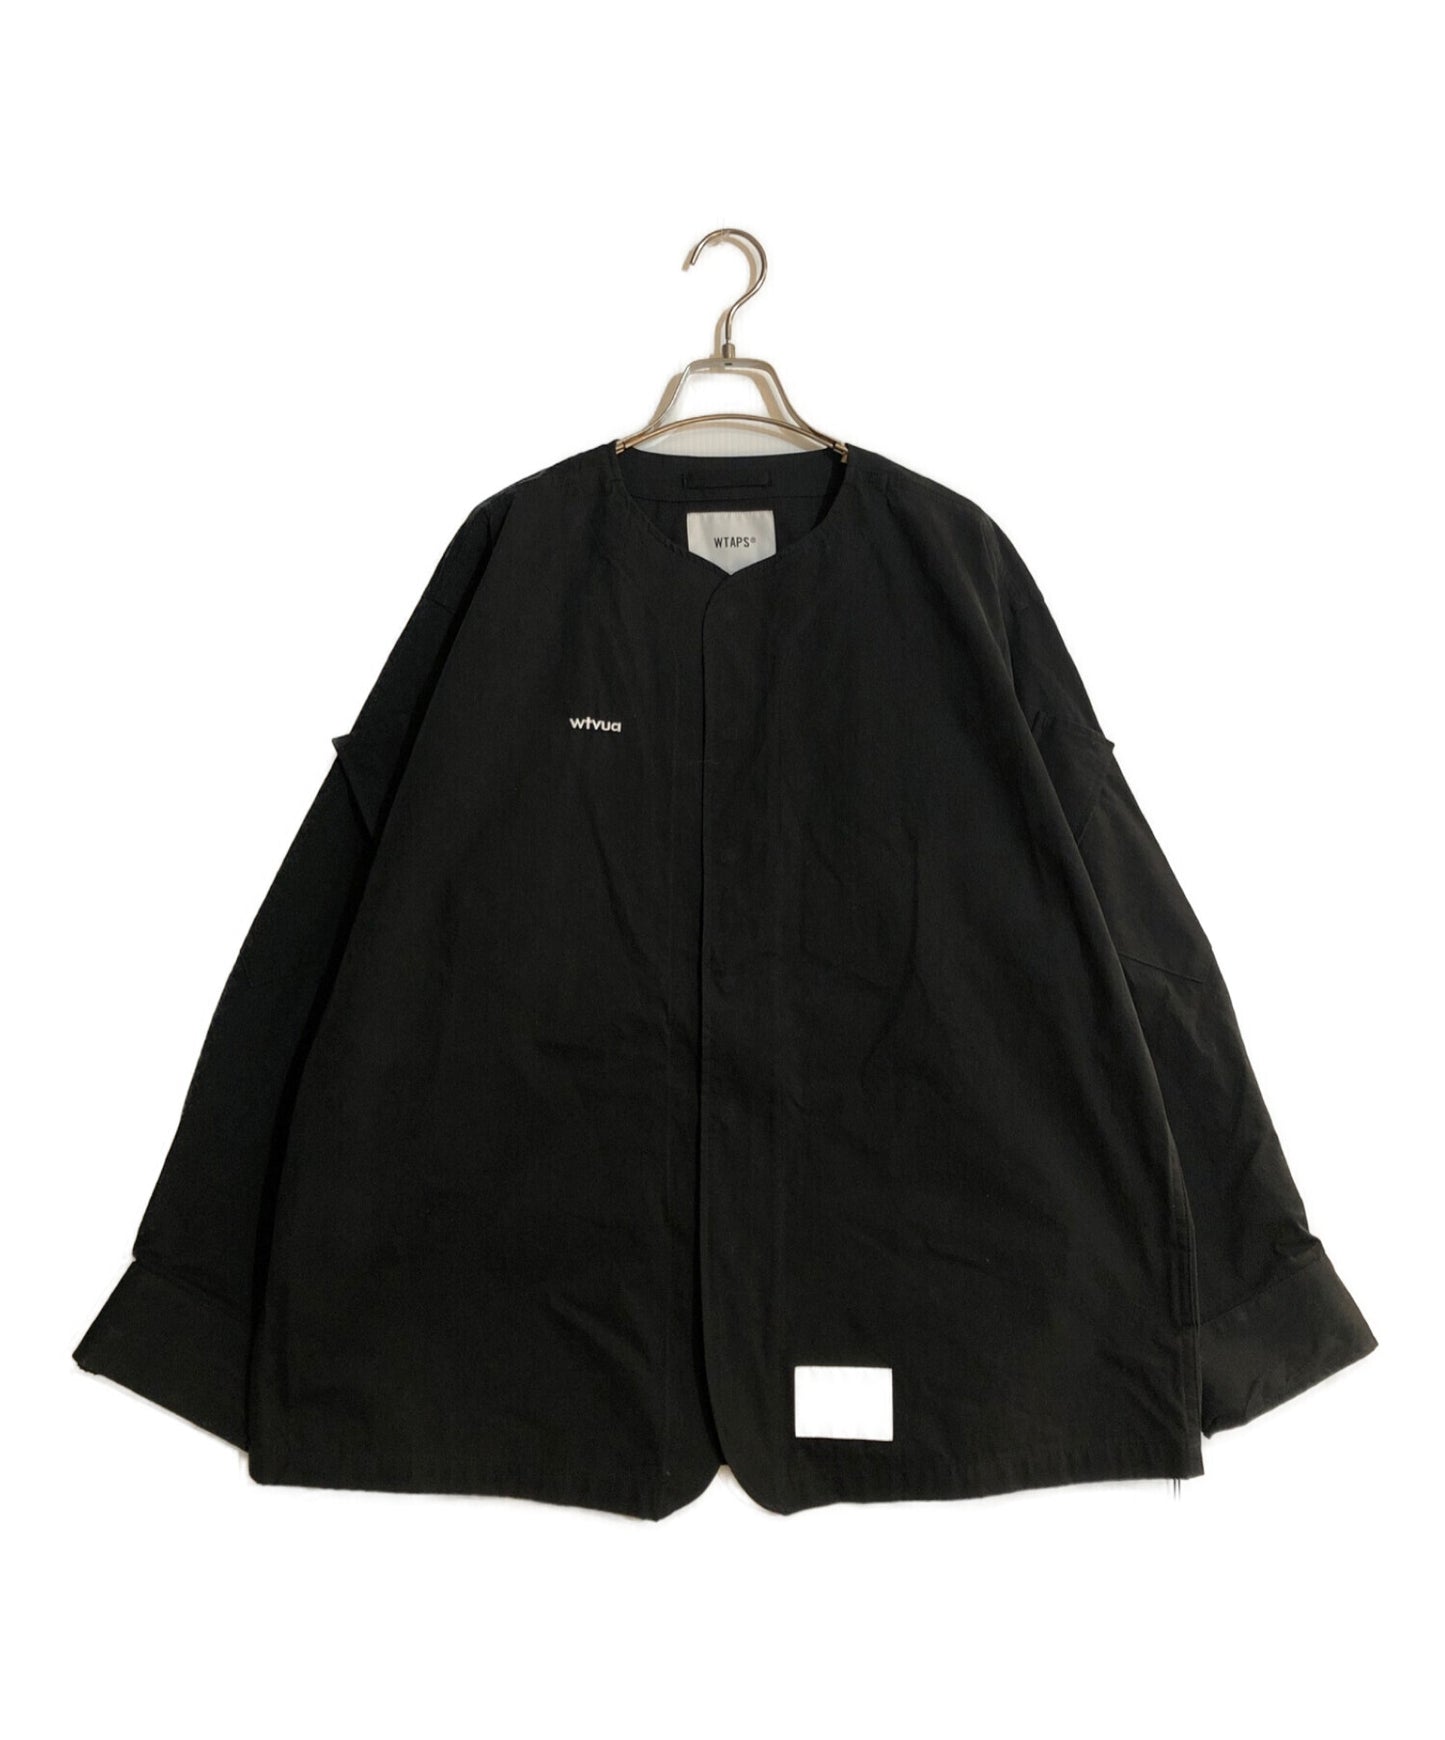 WTAPS SCOUT / LS / NYCO TUSSAH 221WVDT-SHM04